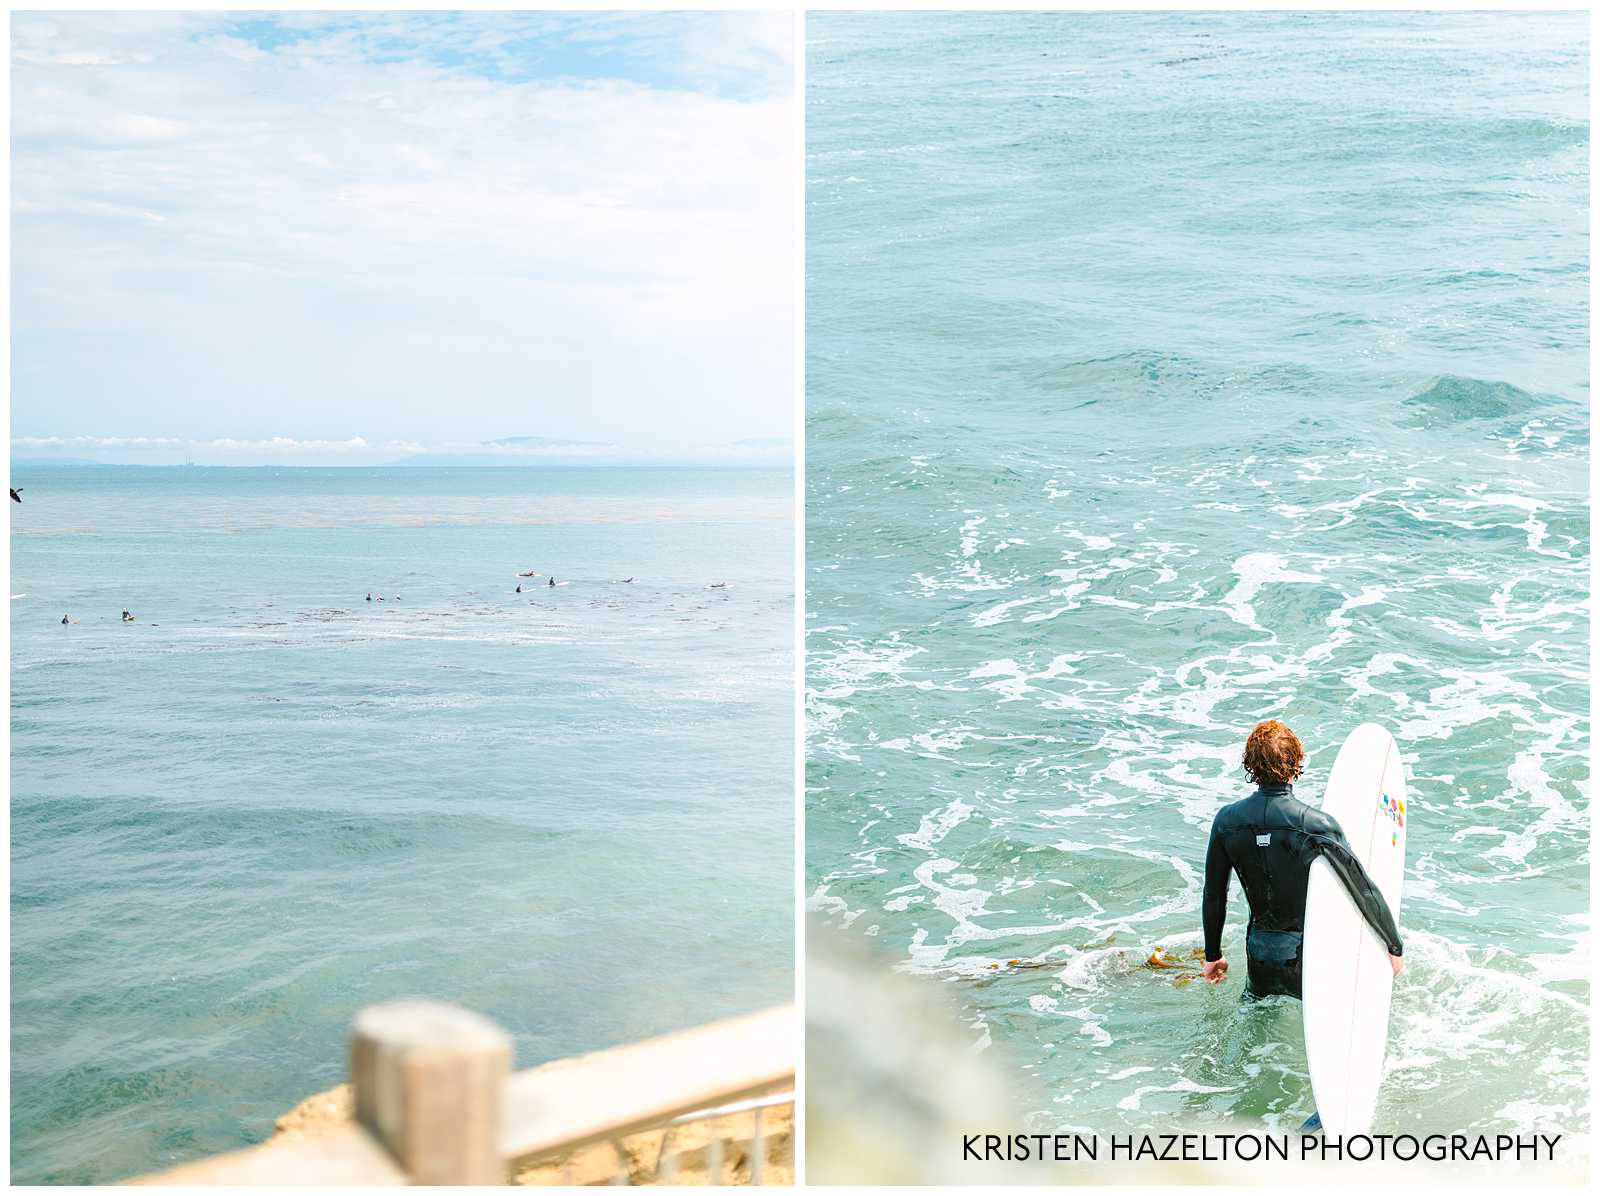 Red haired surfer holding his surfboard, standing in the waves, and looking out at the water. Surfing Photography by Kristen Hazelton. 